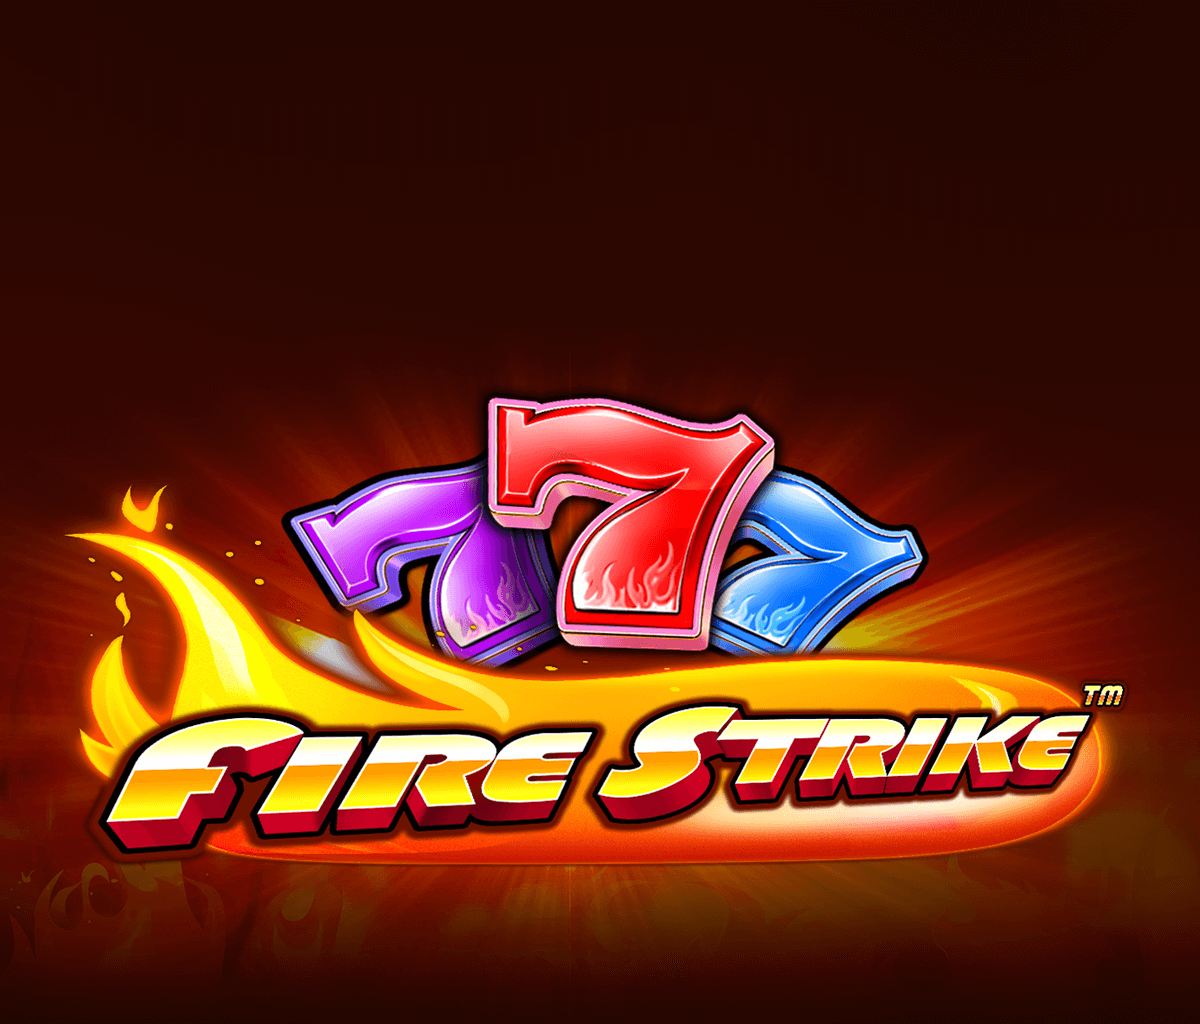 UNBELIEVABLE!   This SLOT was on FIRE!   Prize Strike slot machine at @Yaamava #slots #bigwin